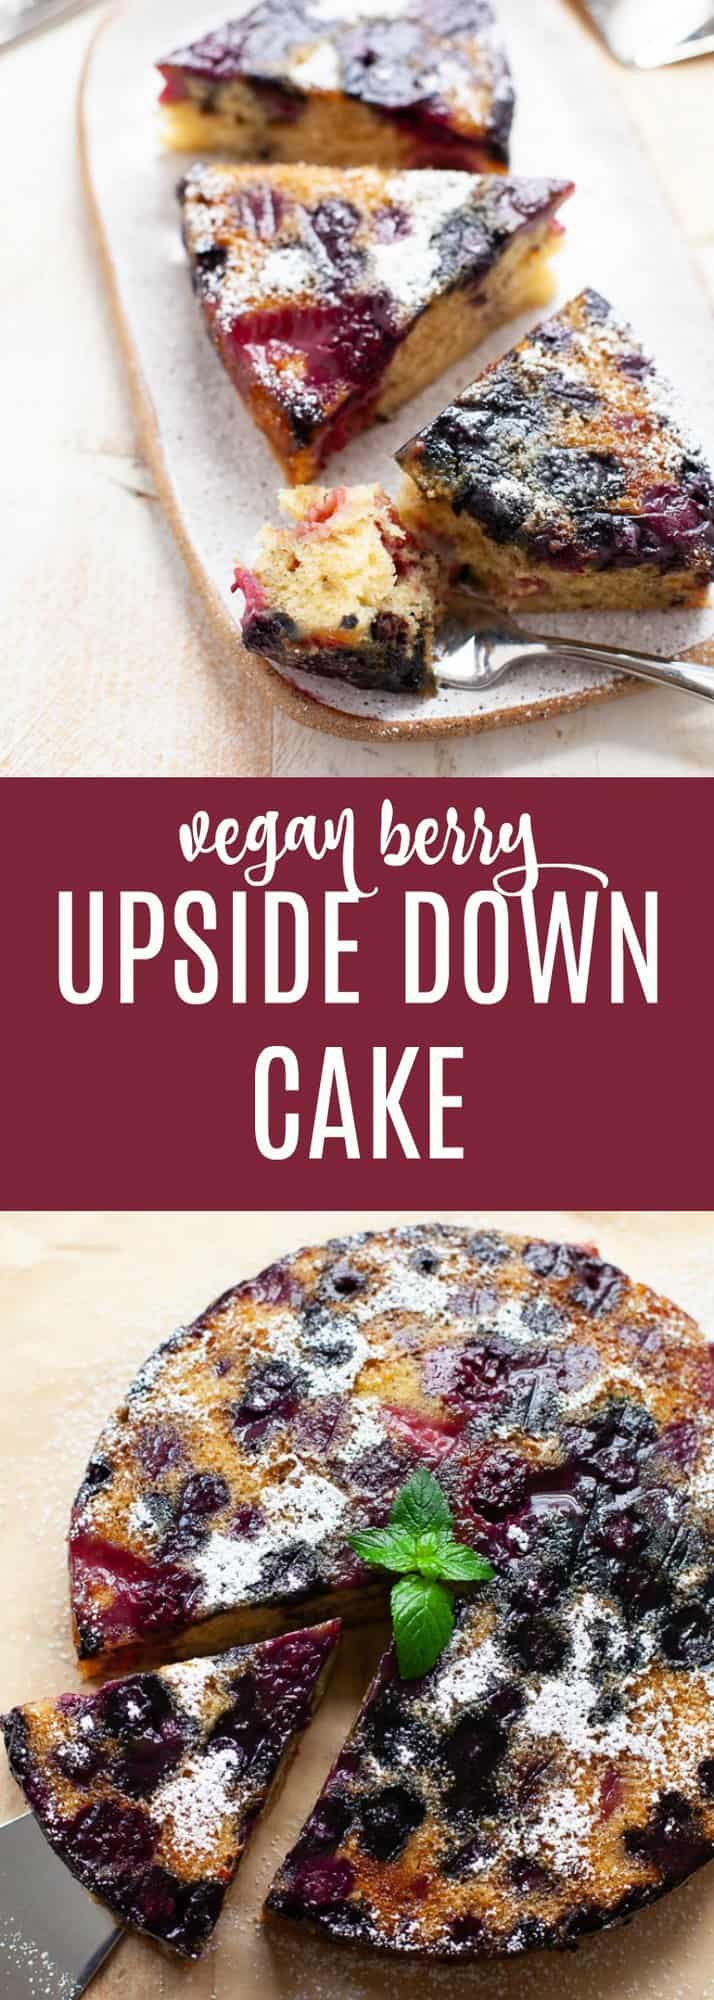 The perfect addition to your end-of-Summer gathering or companion to a cup of afternoon tea, this vegan berry upside down cake is dense, spongy, and combines fresh flavors such as olive oil and mint into a sweet symphony. #vegan